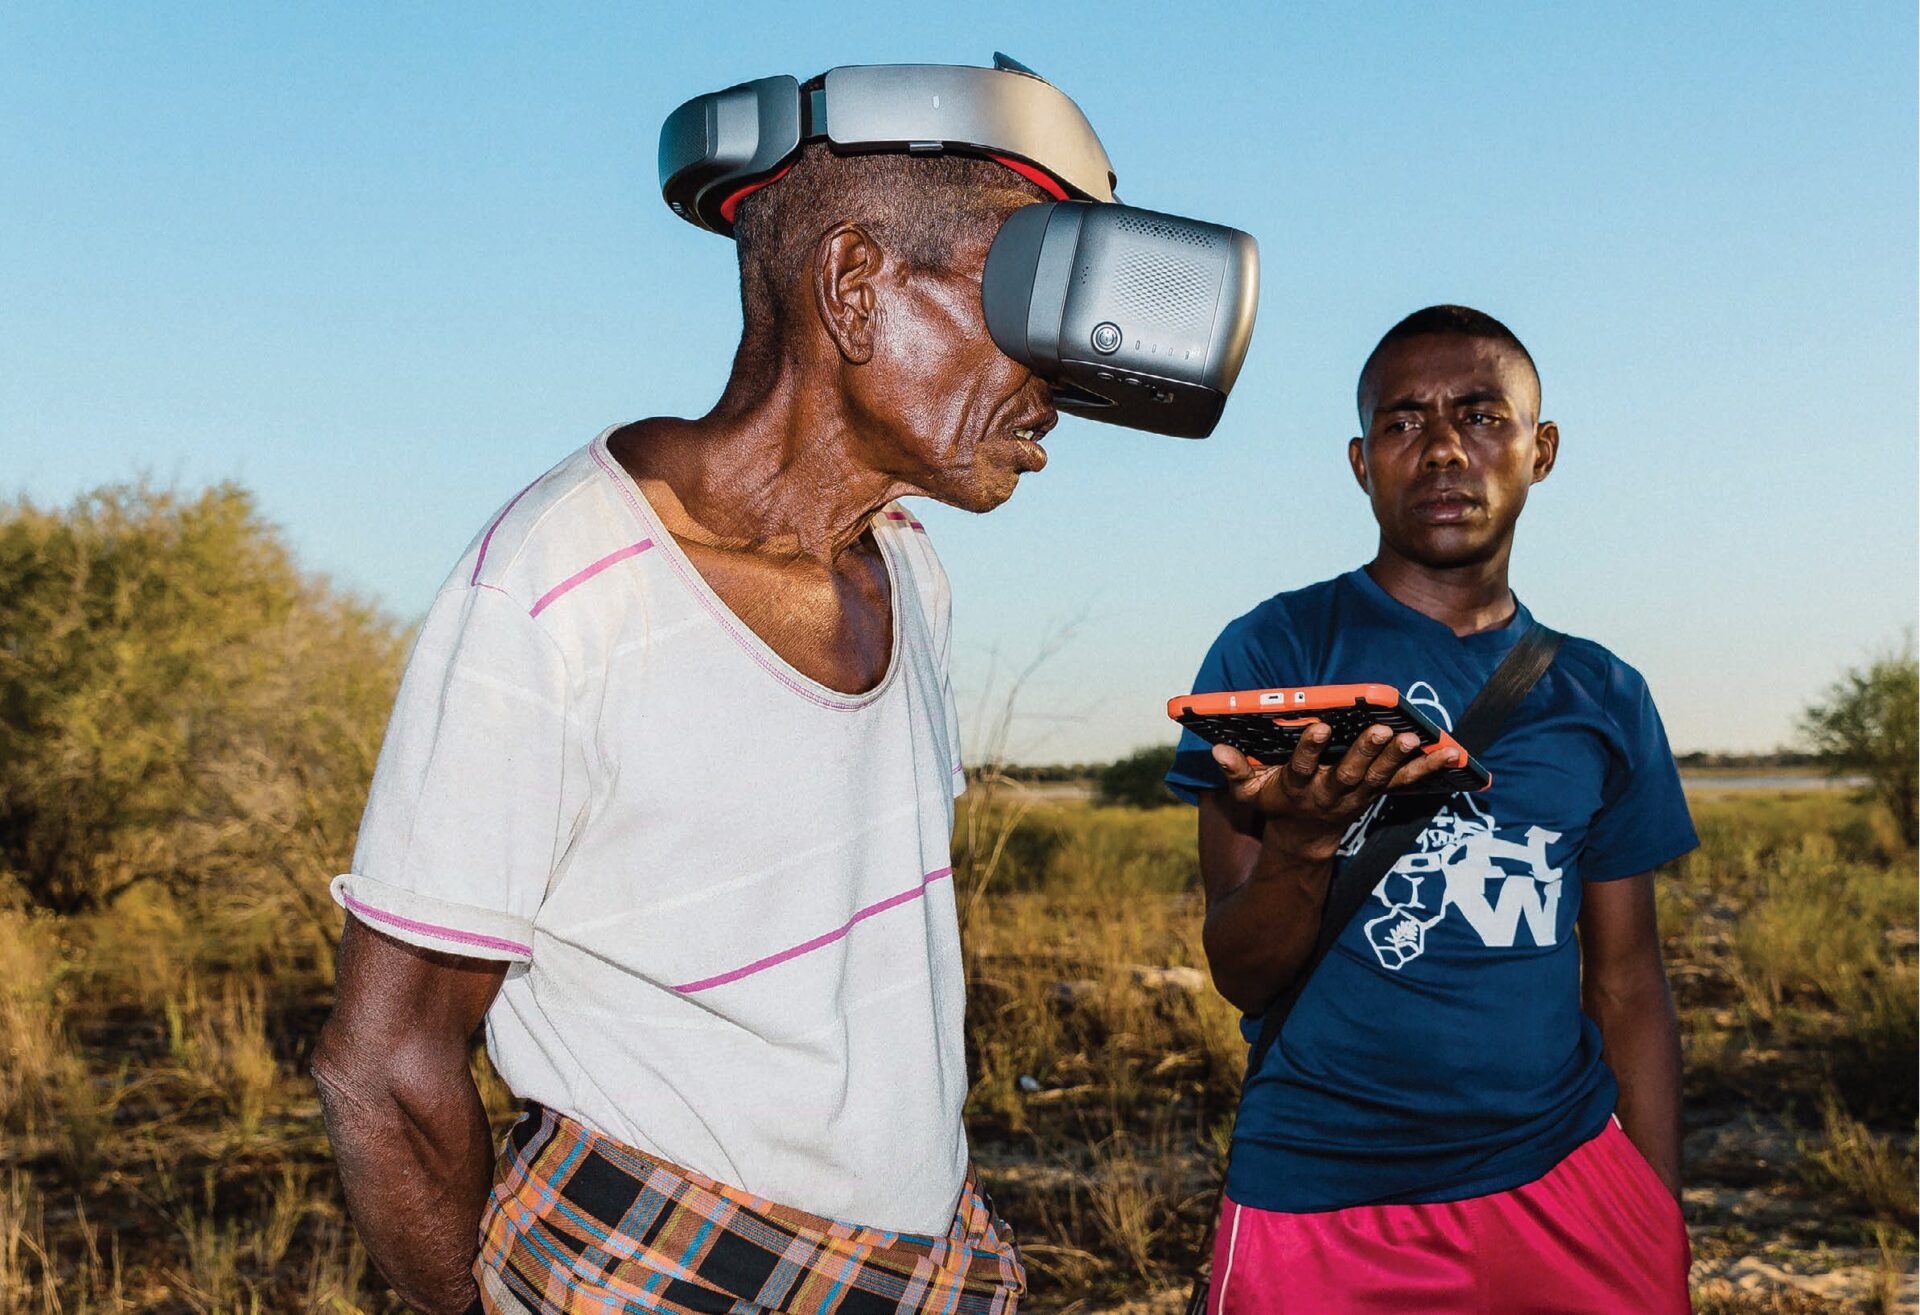 Blue sky, a man has a virtual reality mask, another man holds a tablet while looking at the first man..